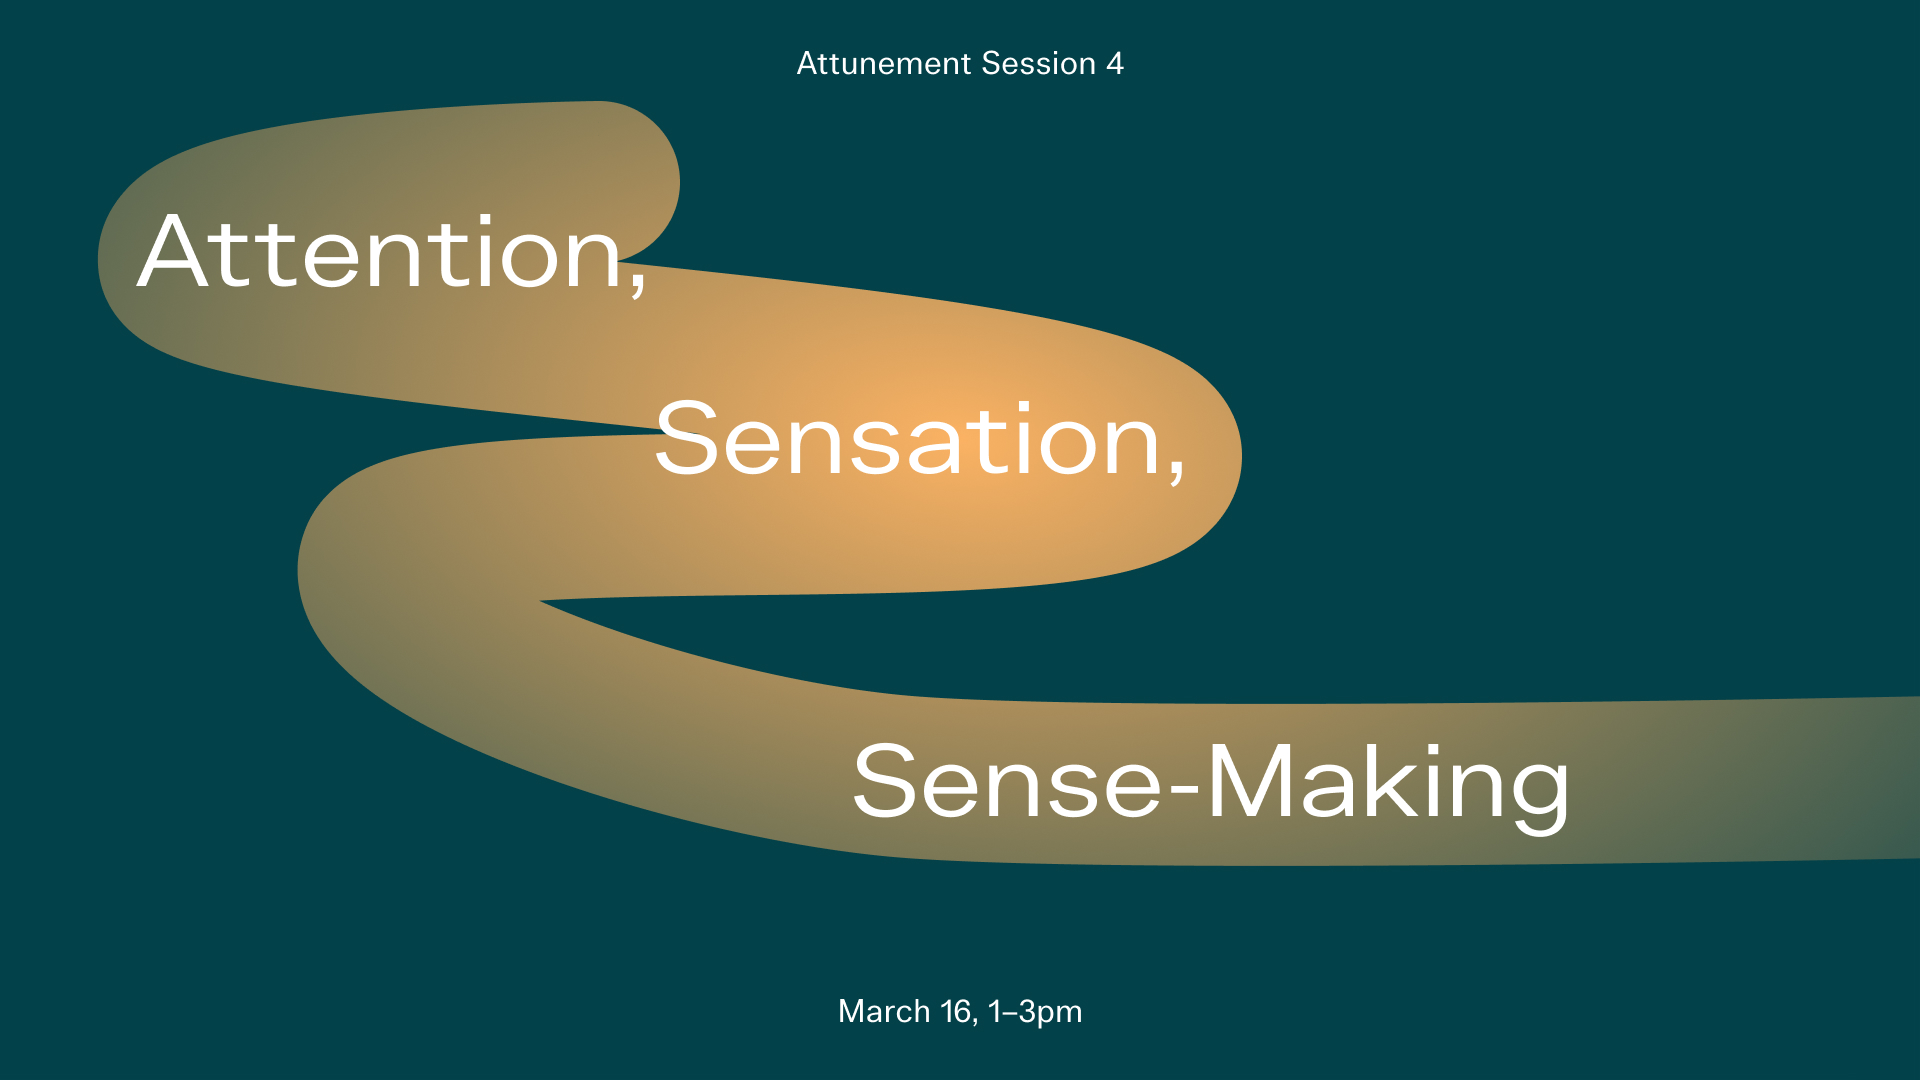 Text image with swirl: Attunement Session 4 Attention, Sensation, Sense-Making